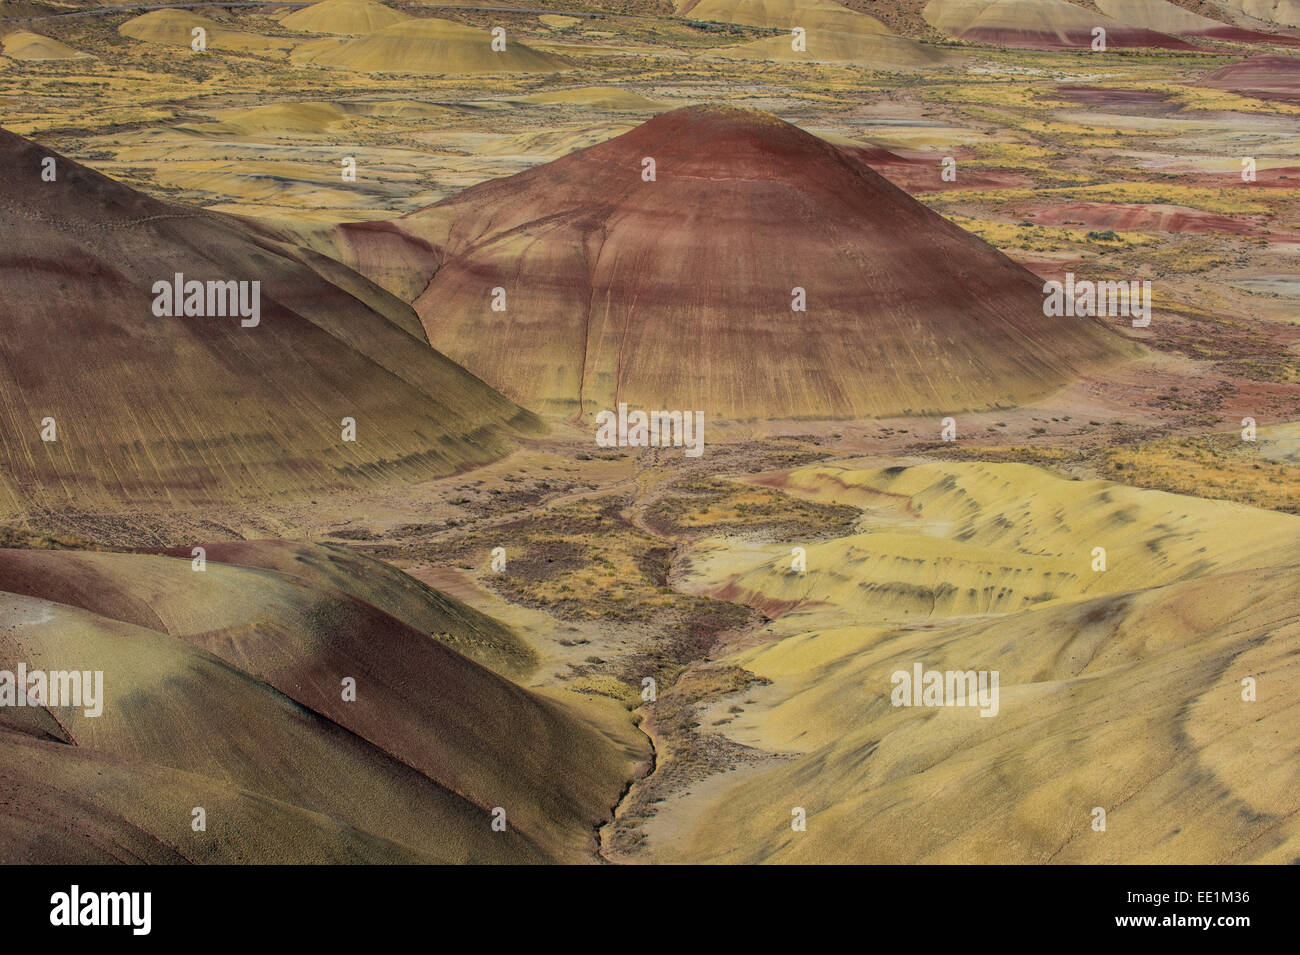 The colourful hills of the Painted Hills unit in the John Day Fossil Beds National Monument, Oregon, United States of America Stock Photo